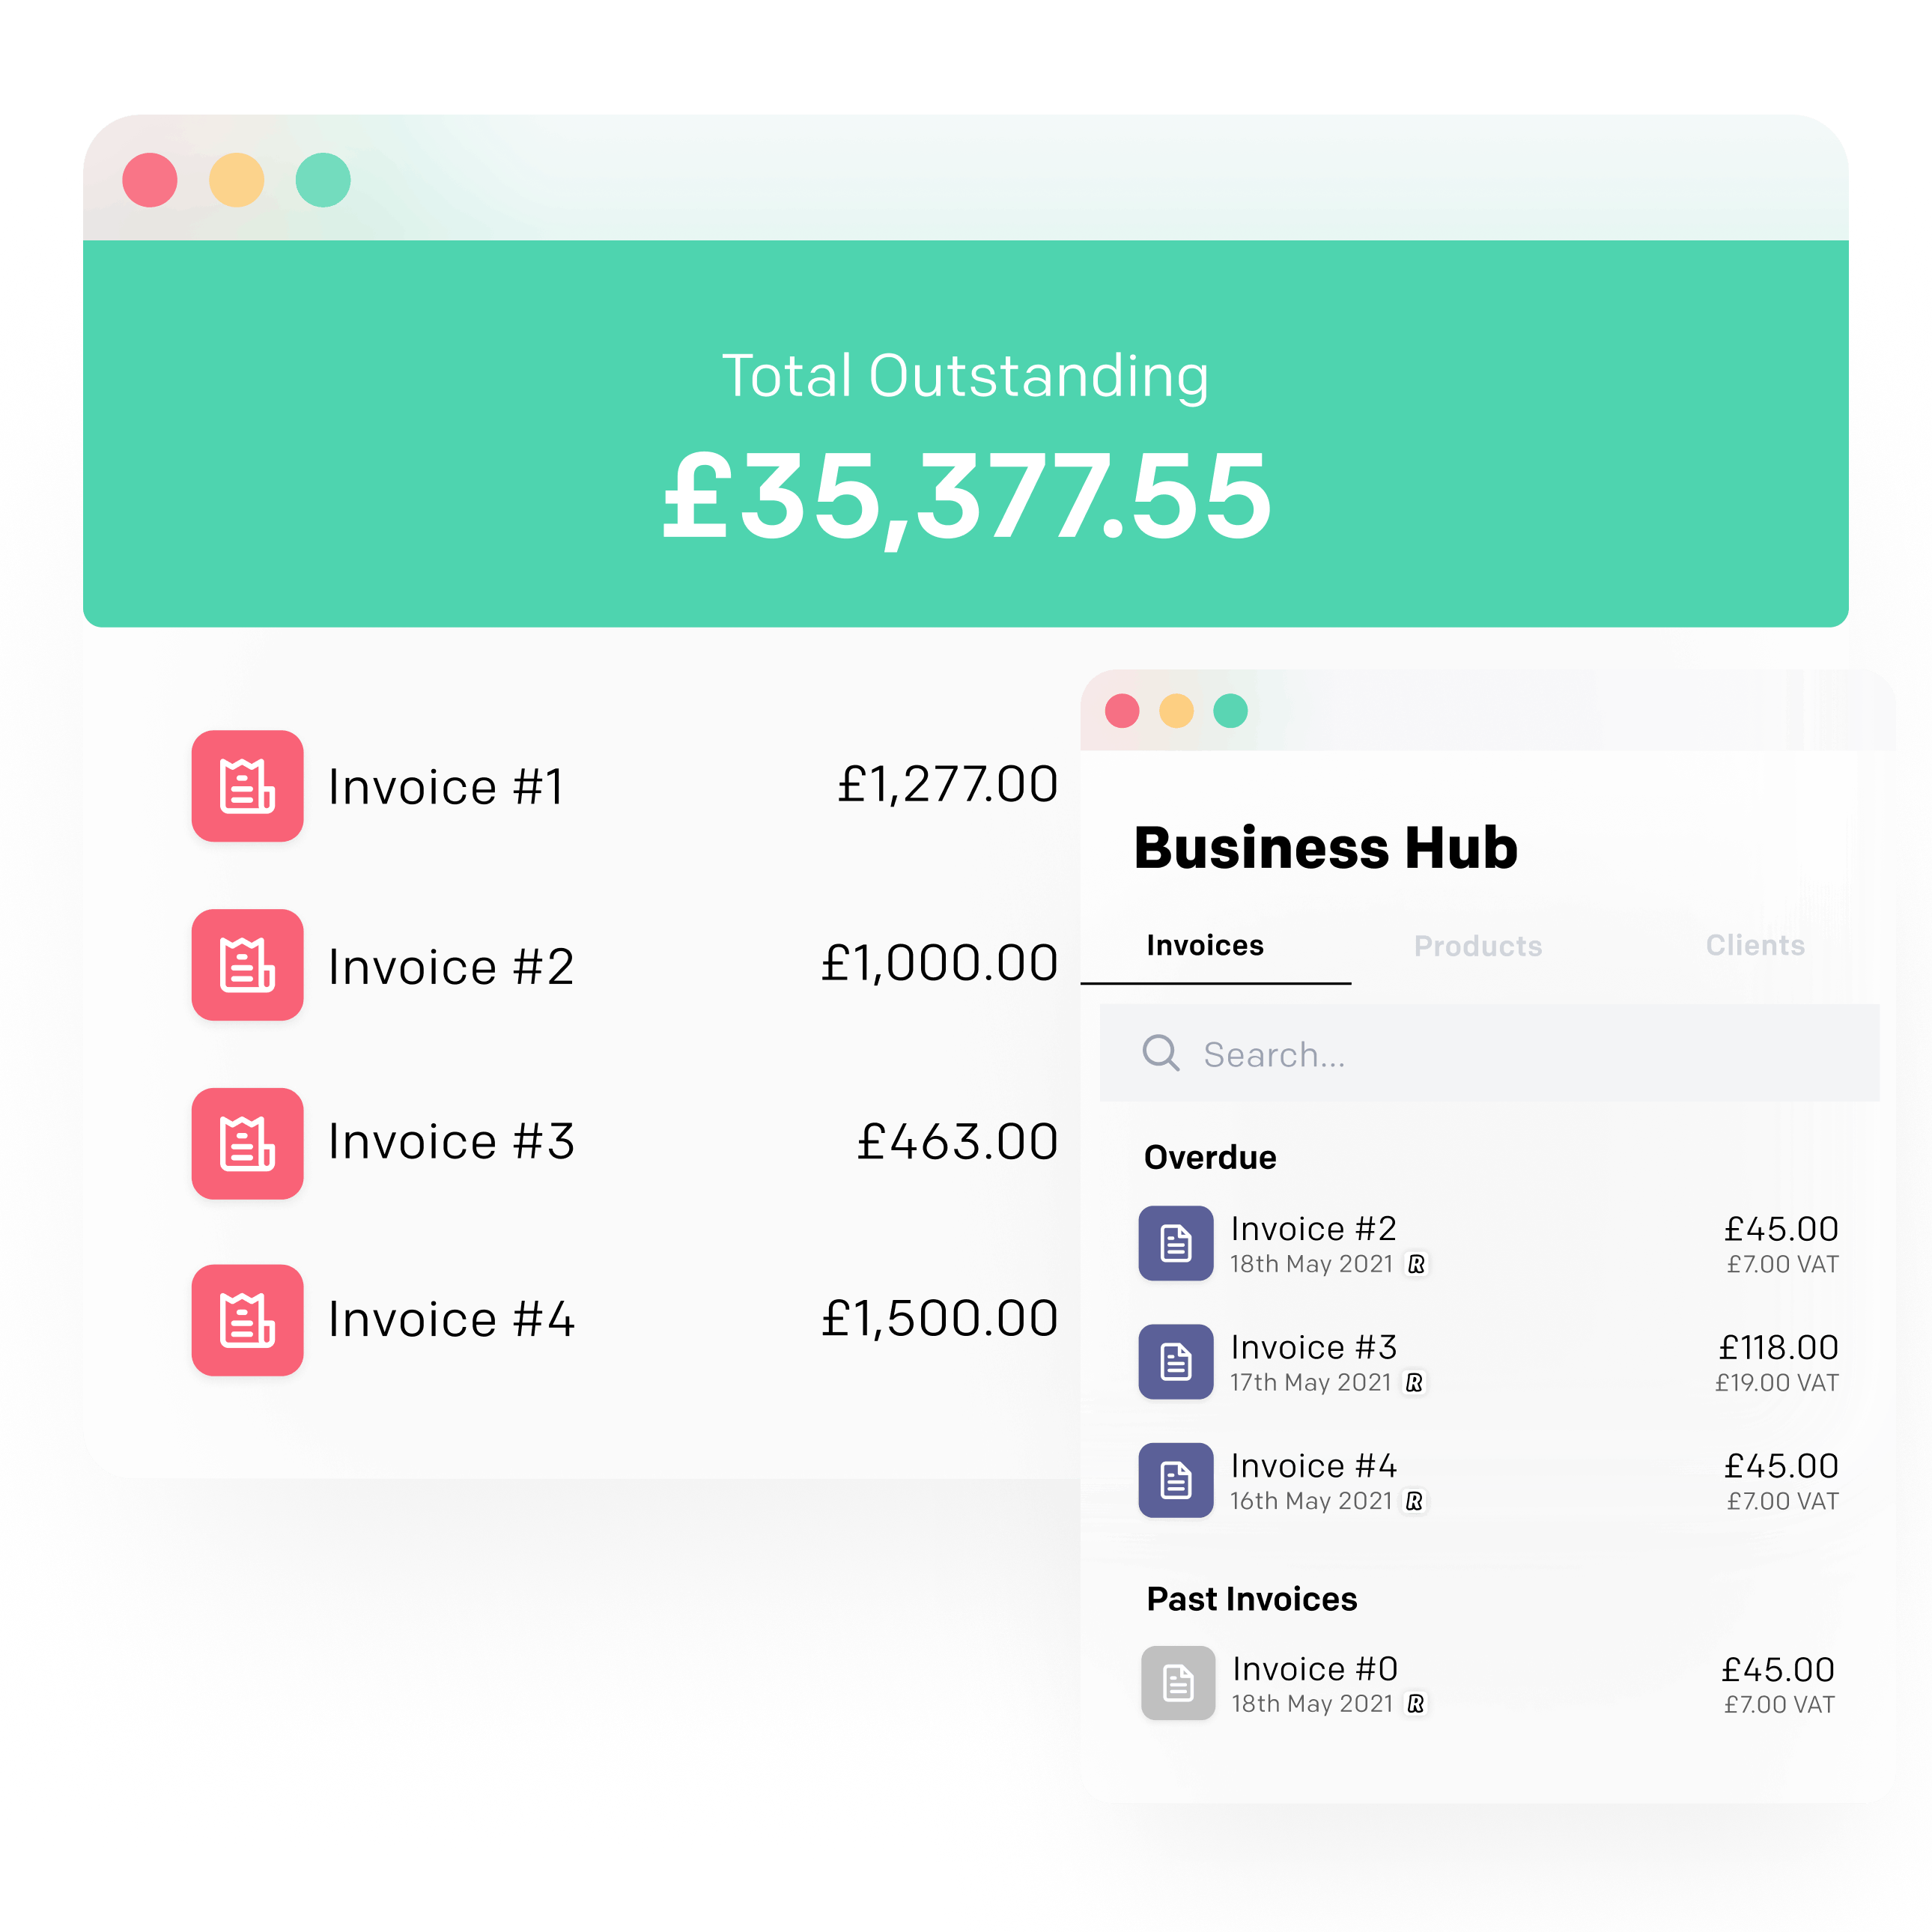 Our invoice tracker keeping you on top of your cashflow